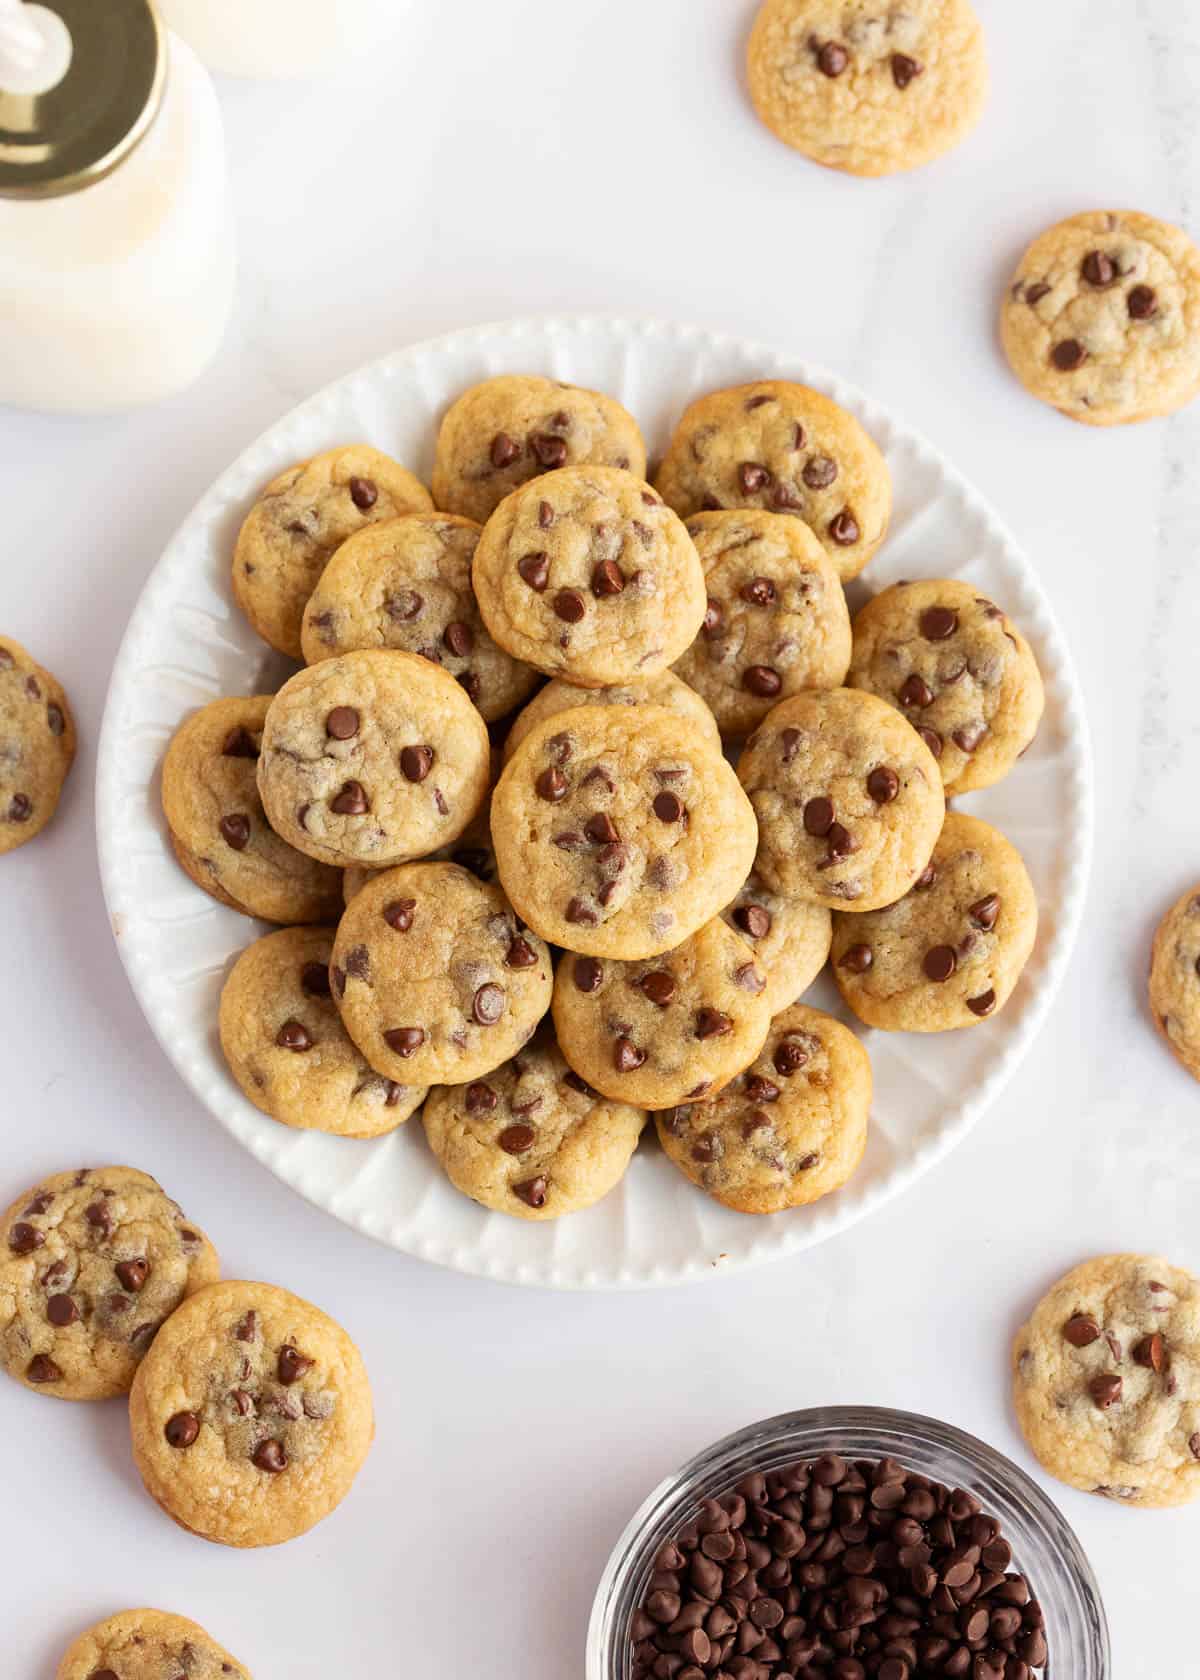 Mini chocolate chip cookies on a white plate.